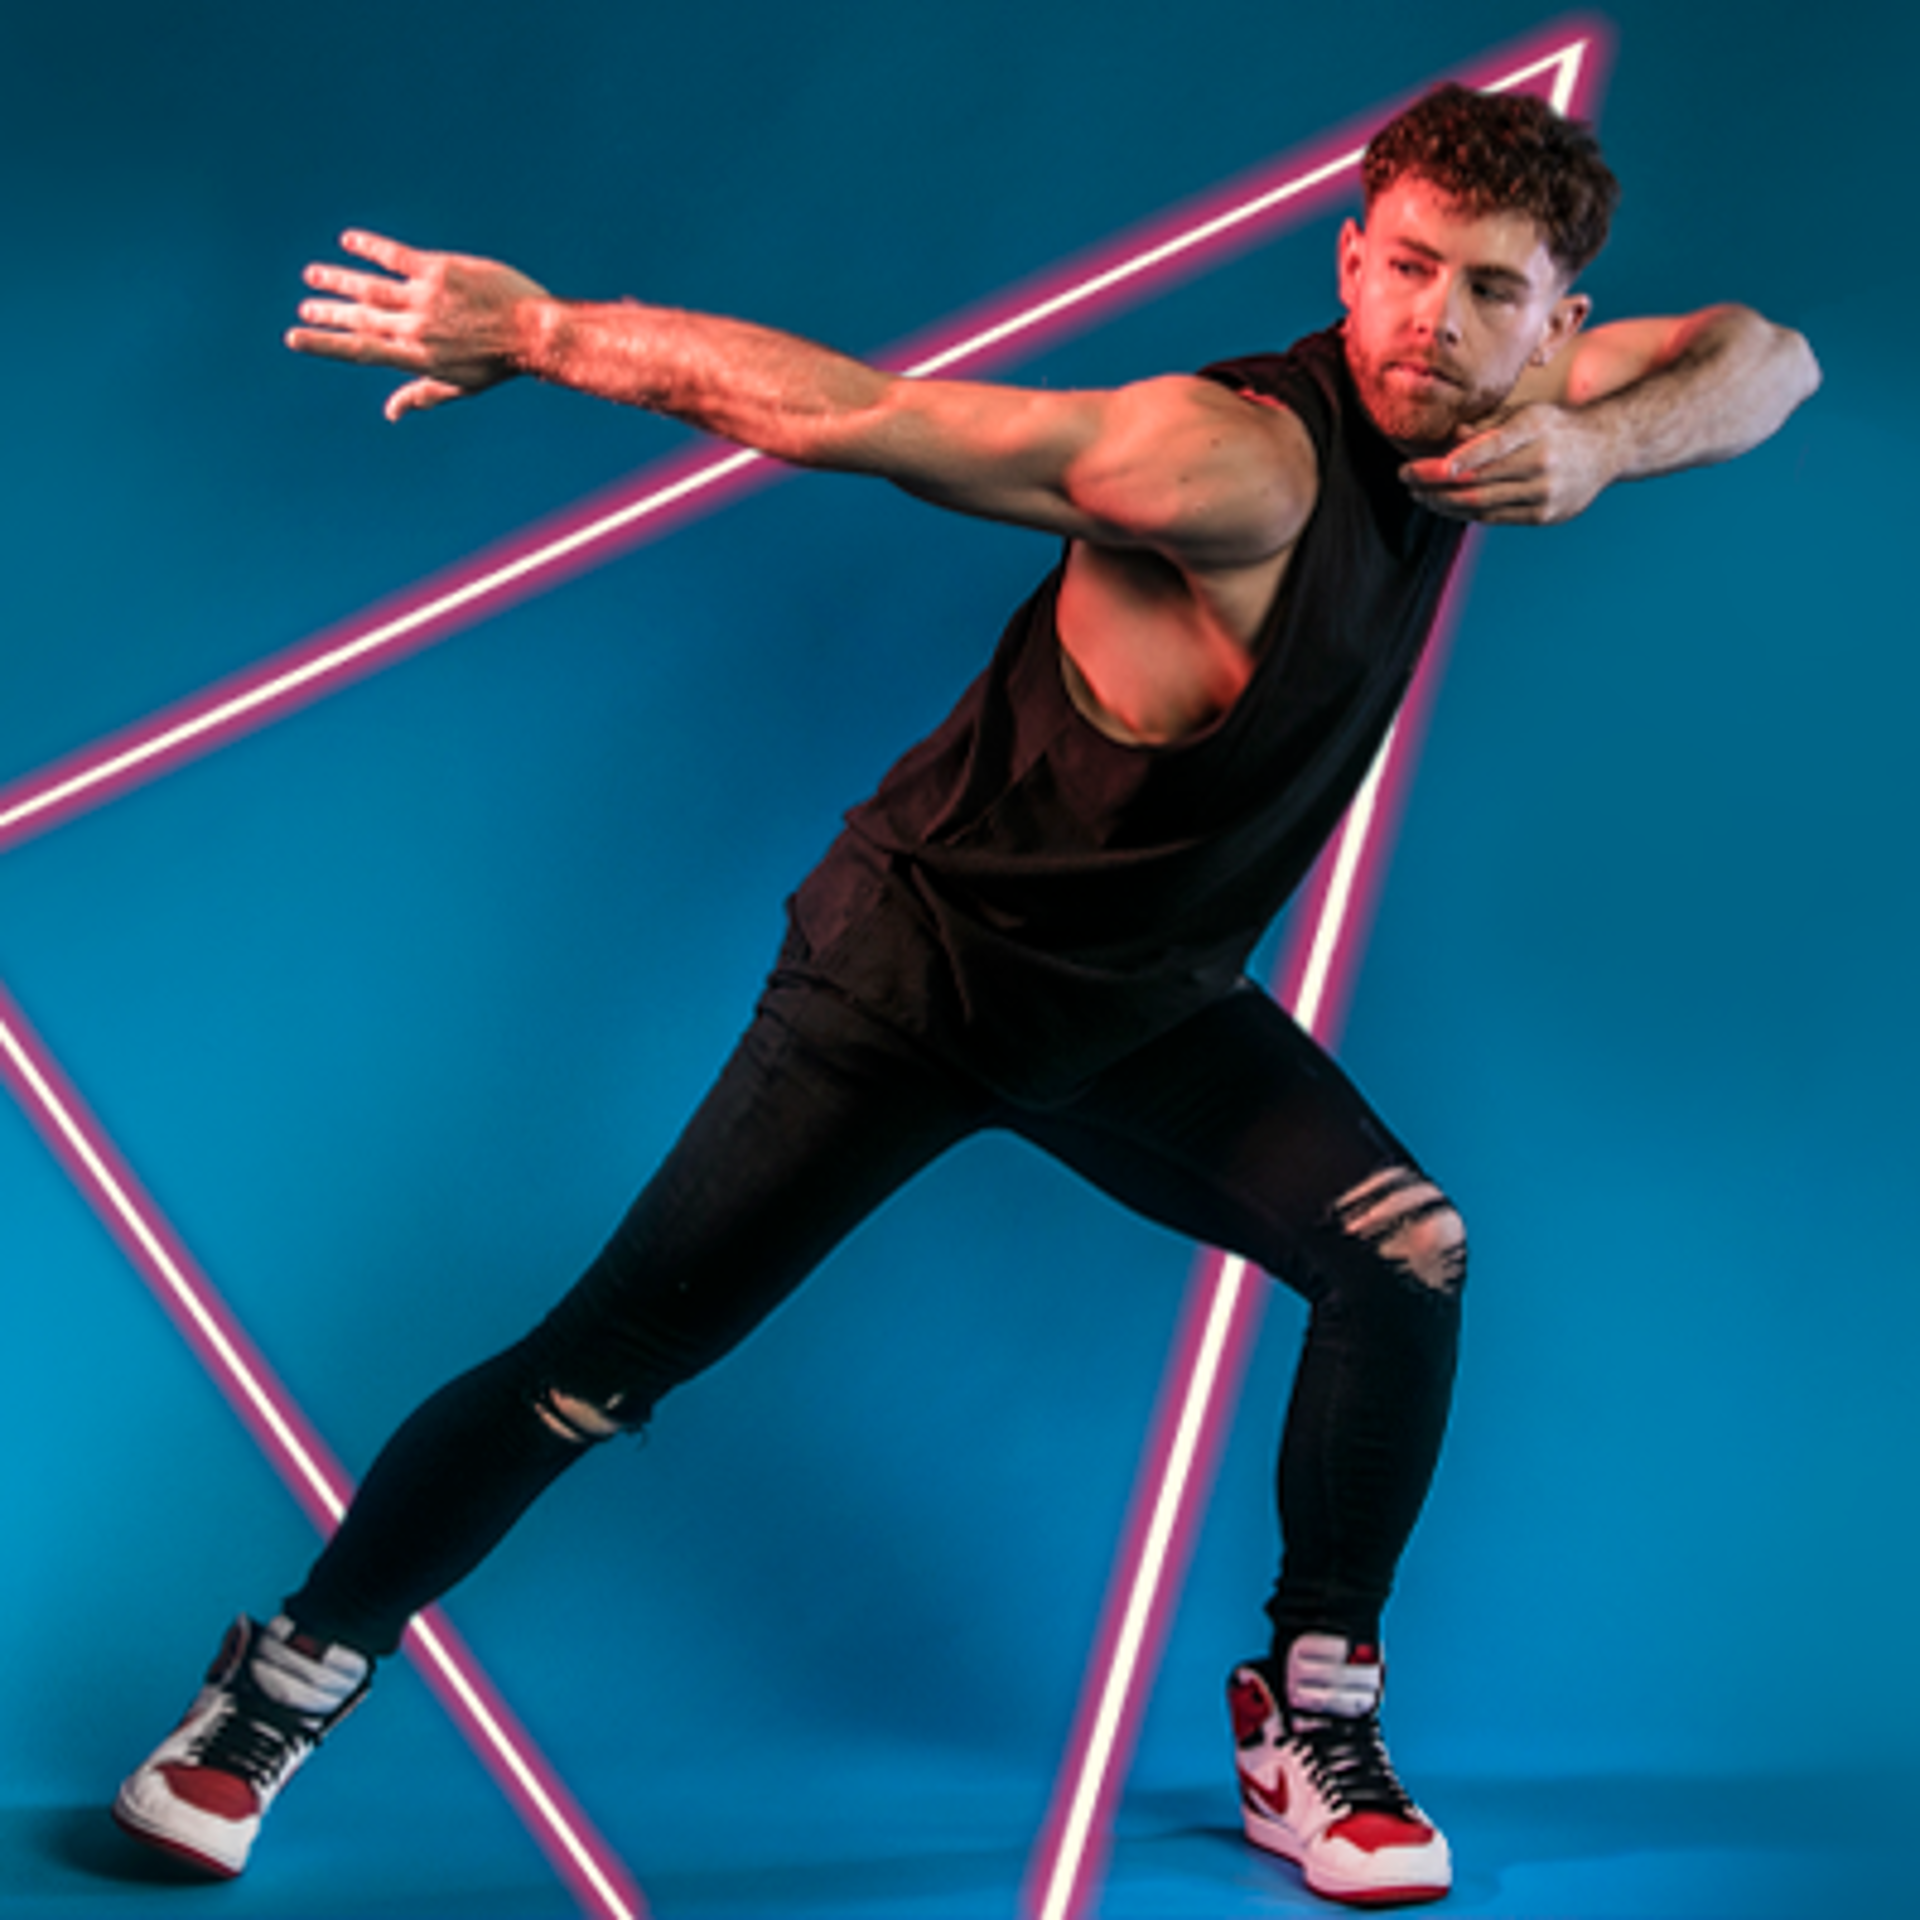 white male dancer lunging to the right with arms pointed to the left. Black outfit and white trainers. On blue studio background. 